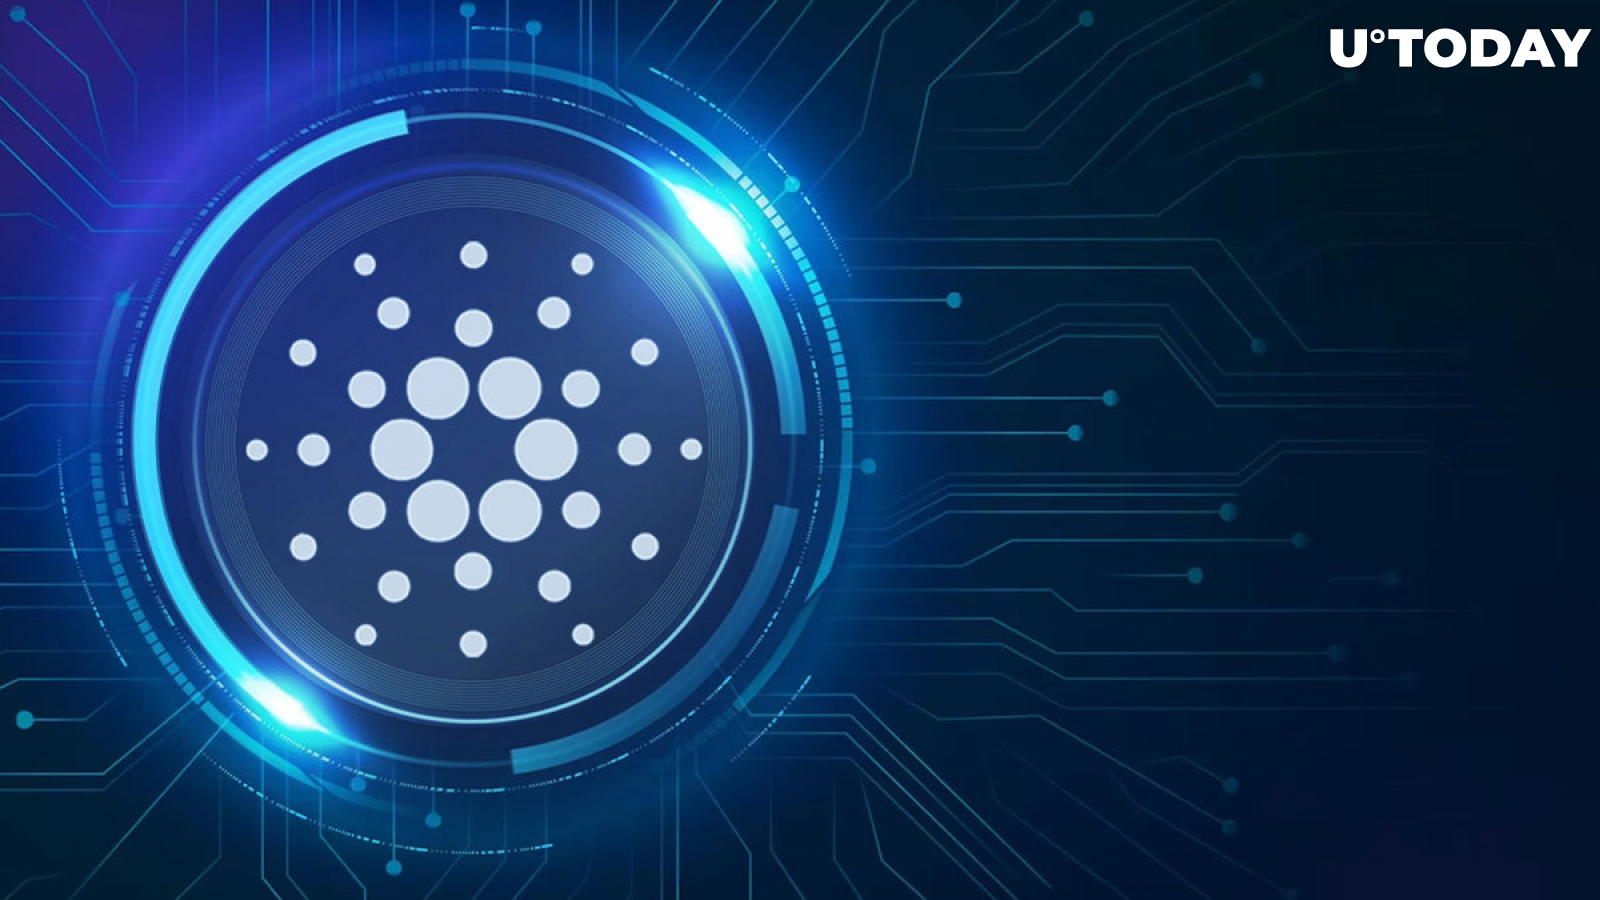 Cardano (ADA) Price Revival Creeping in, Here Are Roadblocks to Watch out For